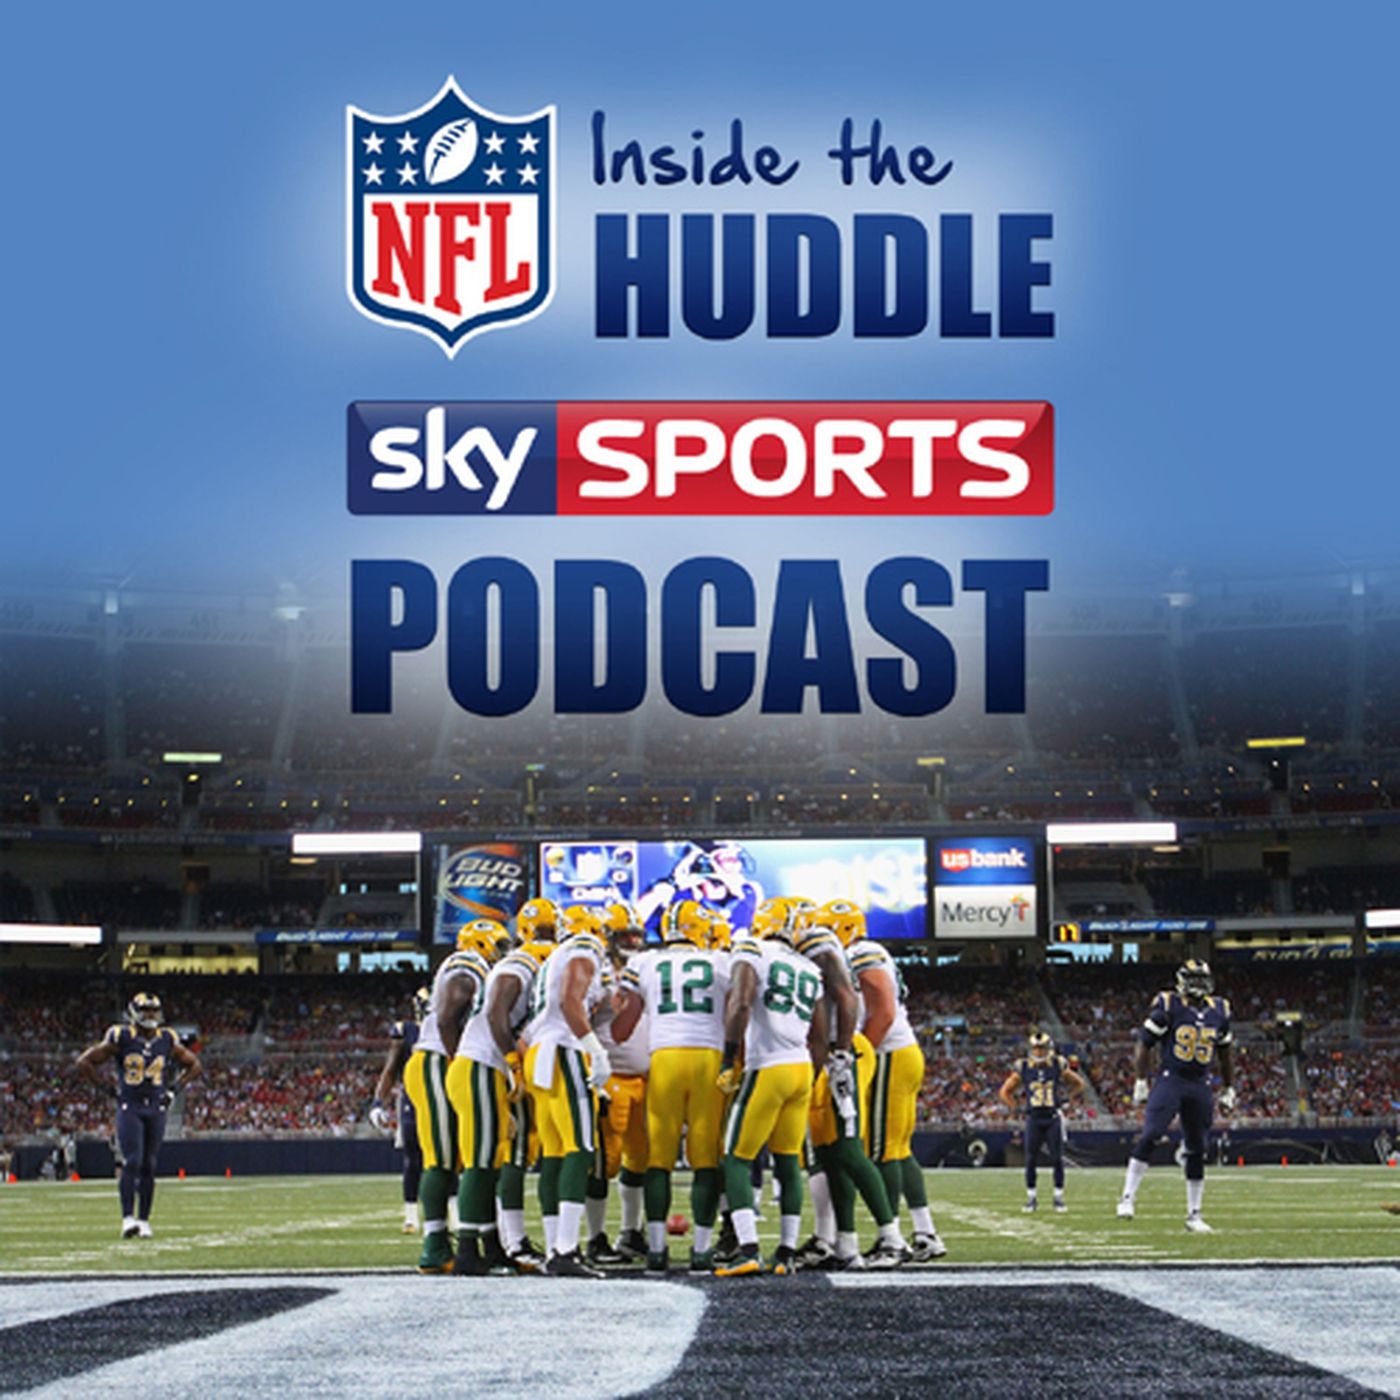 Inside the Huddle: Jay Cutler is back in the NFL